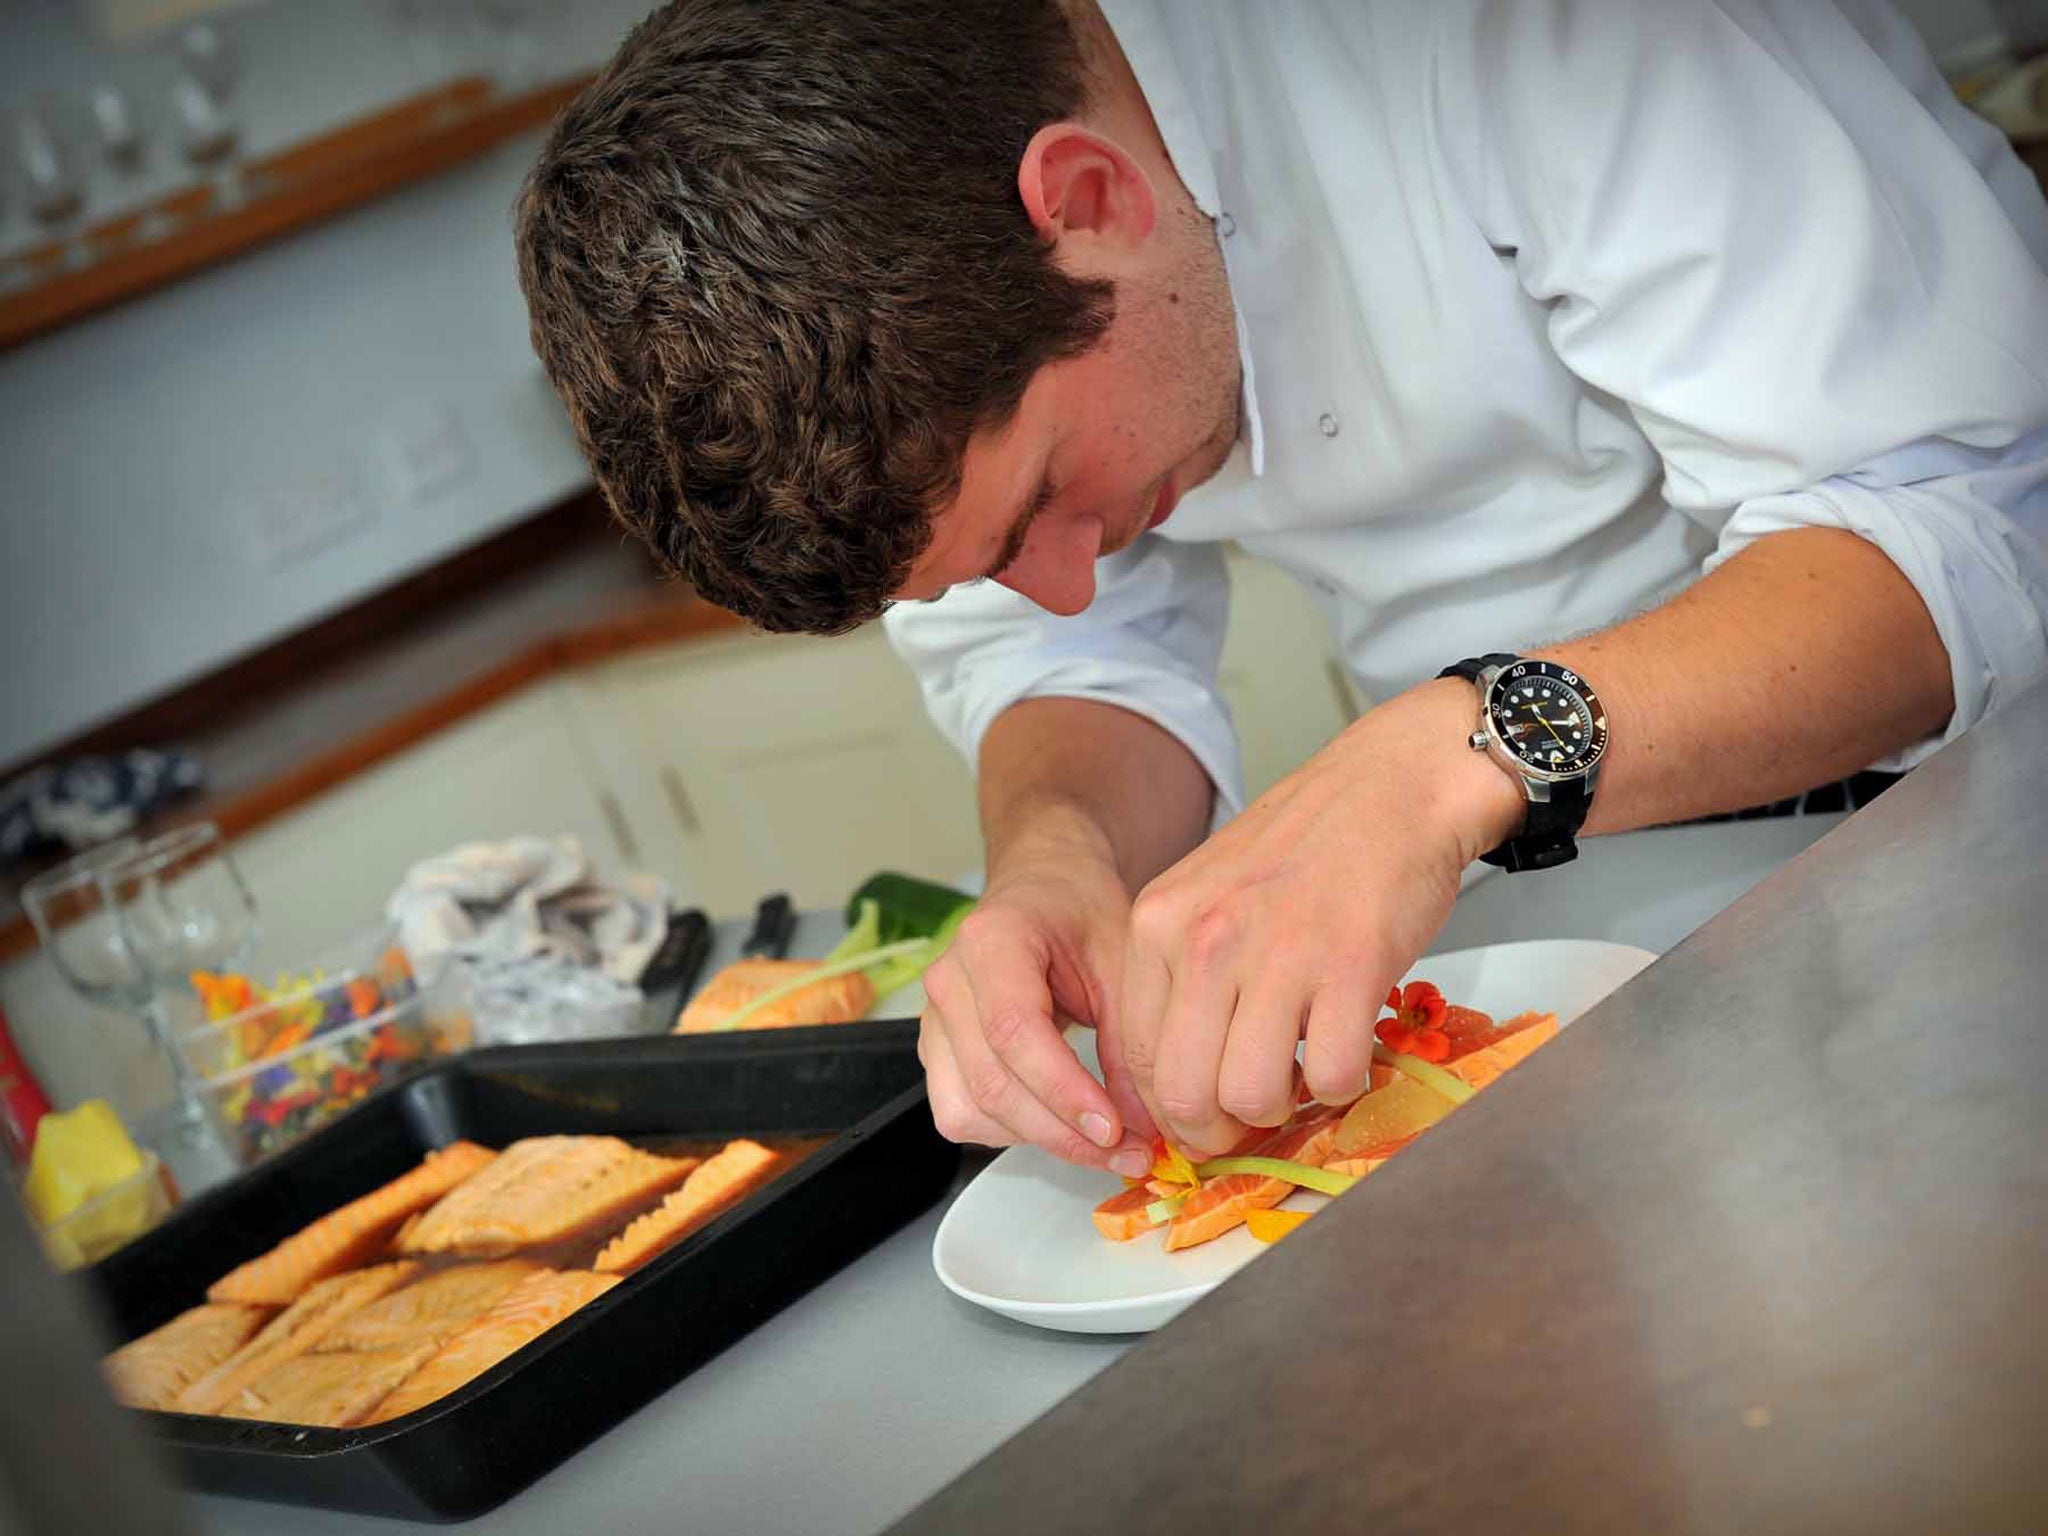 Chef Calum Munro prepares a starter dish in the kitchen at Scorrybreac House